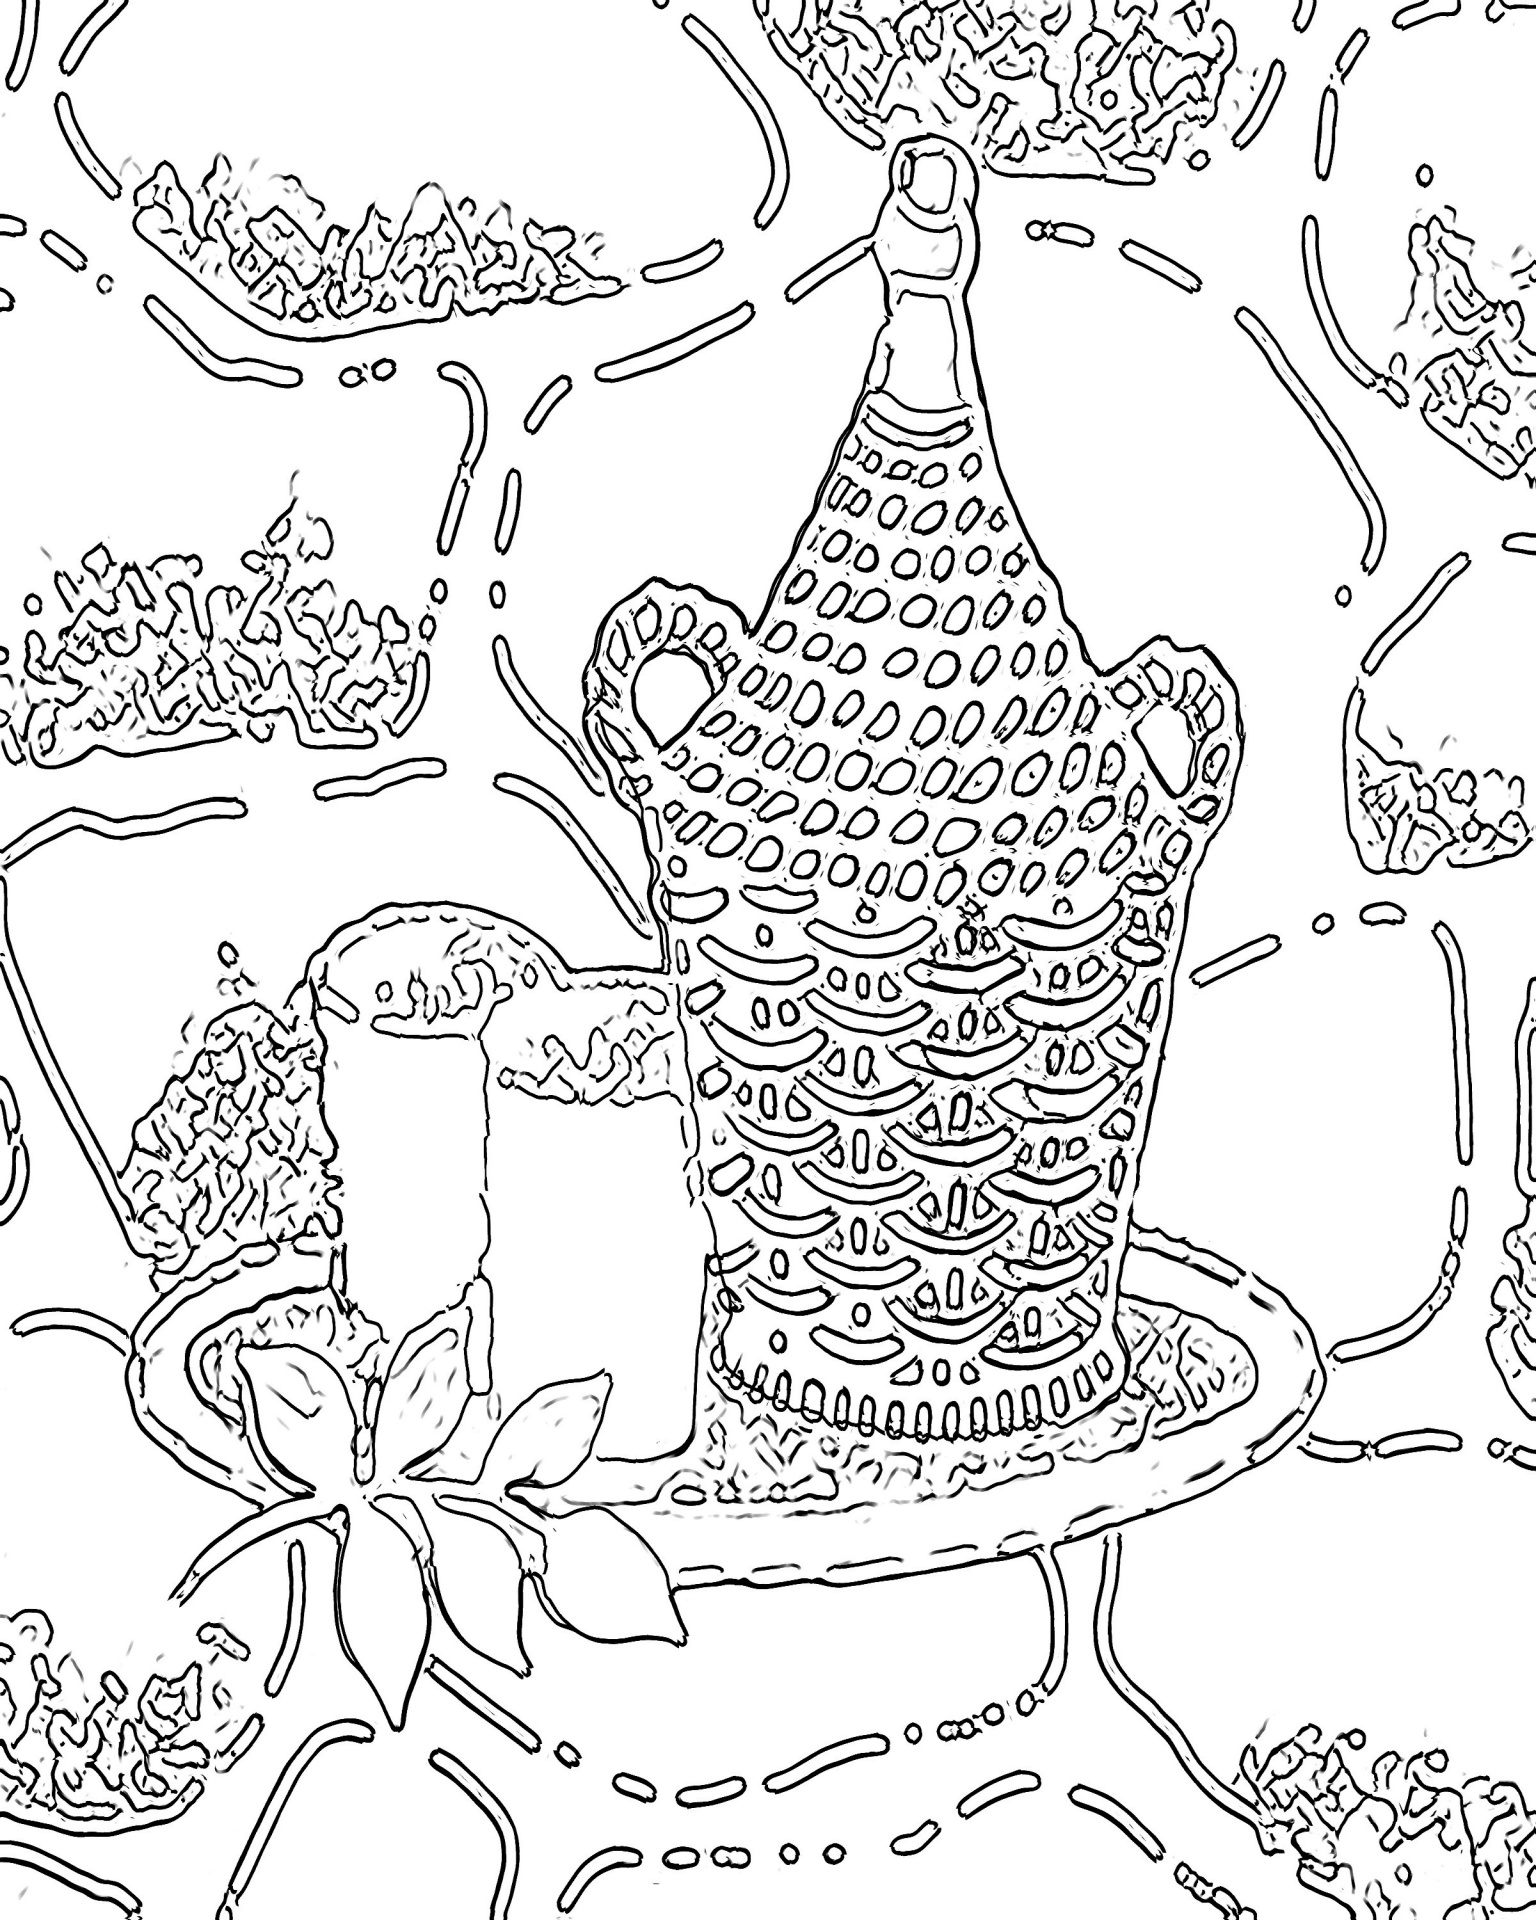 Colouring Page # 2 Free Stock Photo - Public Domain Pictures